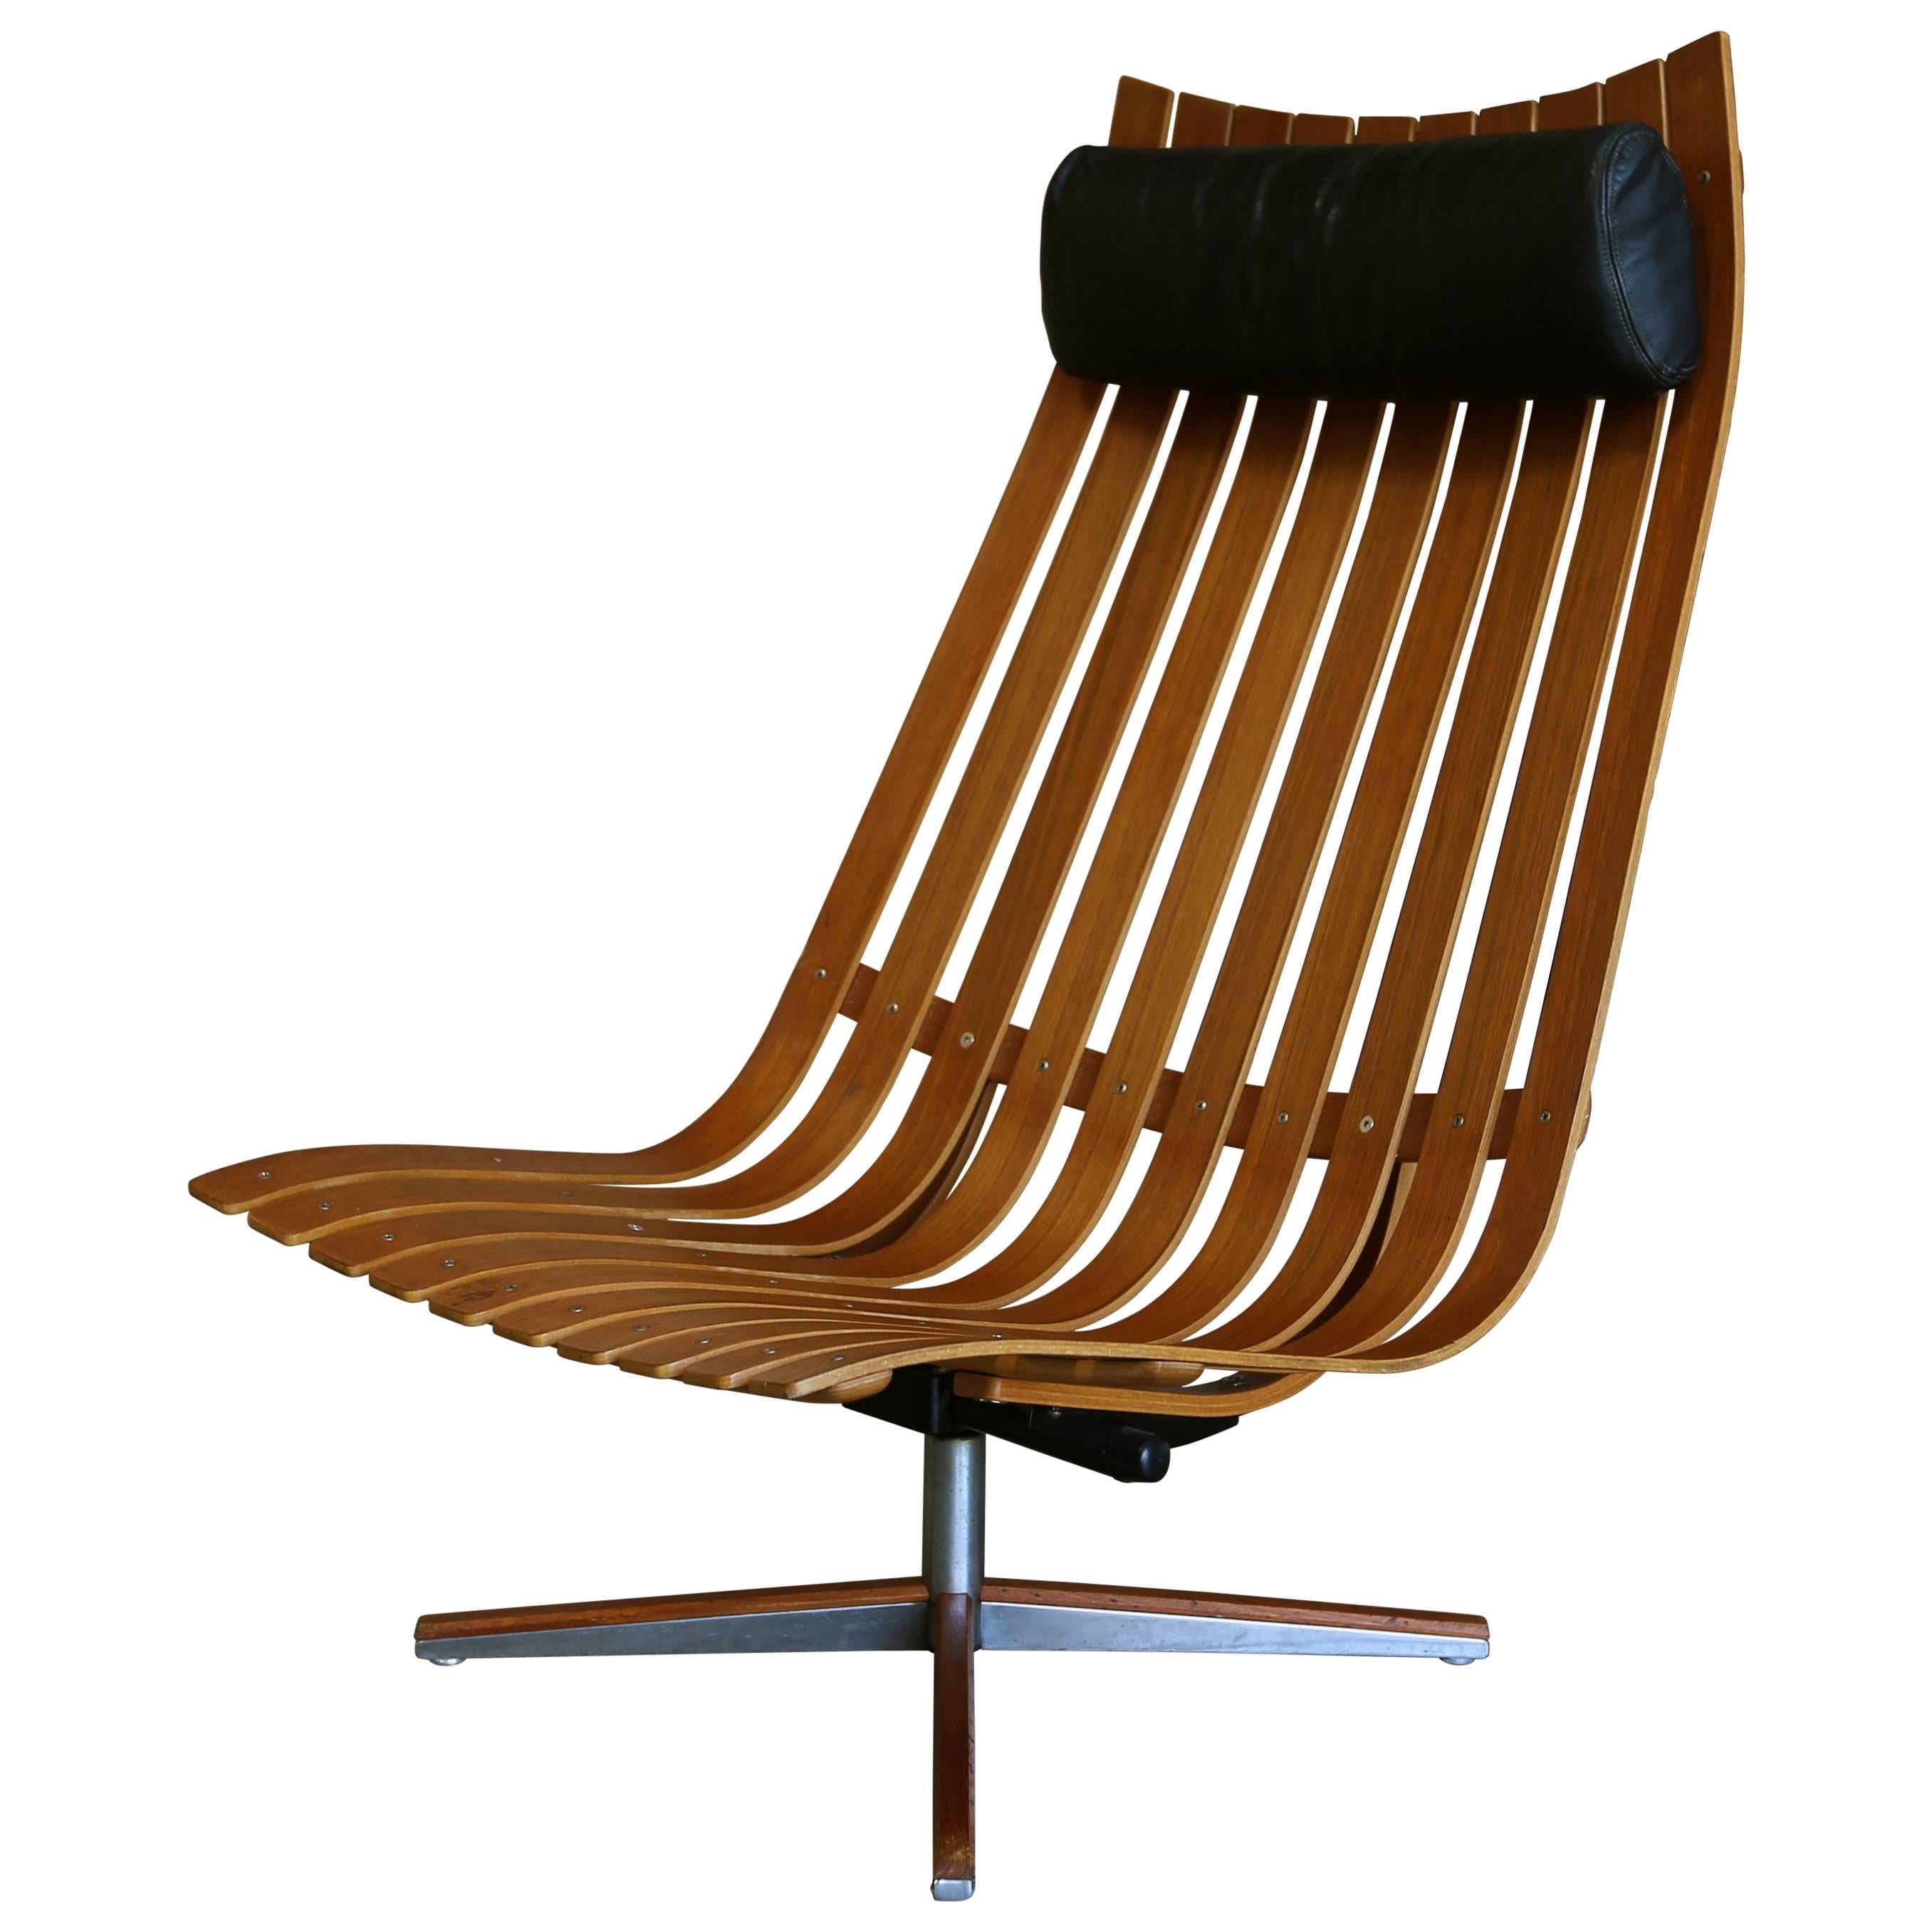 Hans Brattrud "Scandia" Swivel Lounge Chair for Hove Mobler